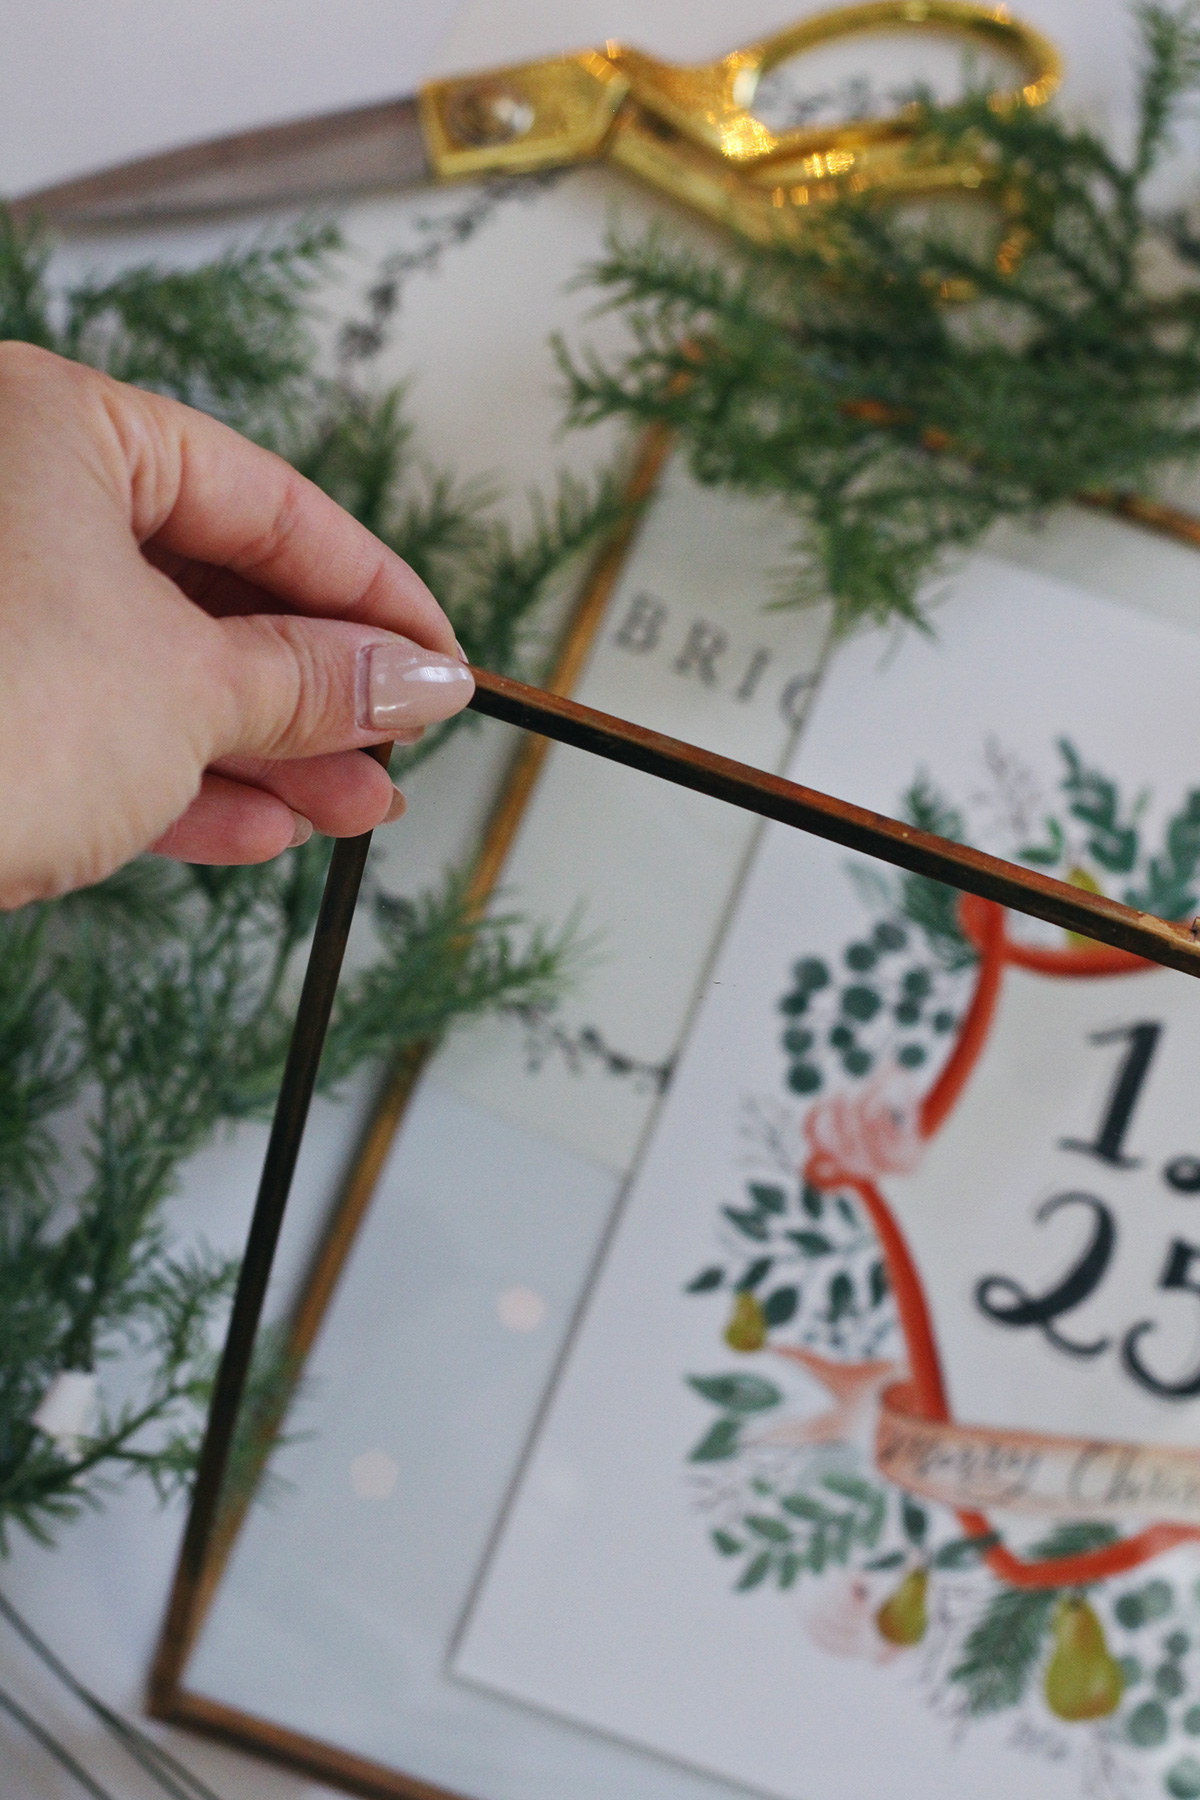 How to use a Hearth & Hand™ brass frame from Target to make this Holiday Wall Hanging